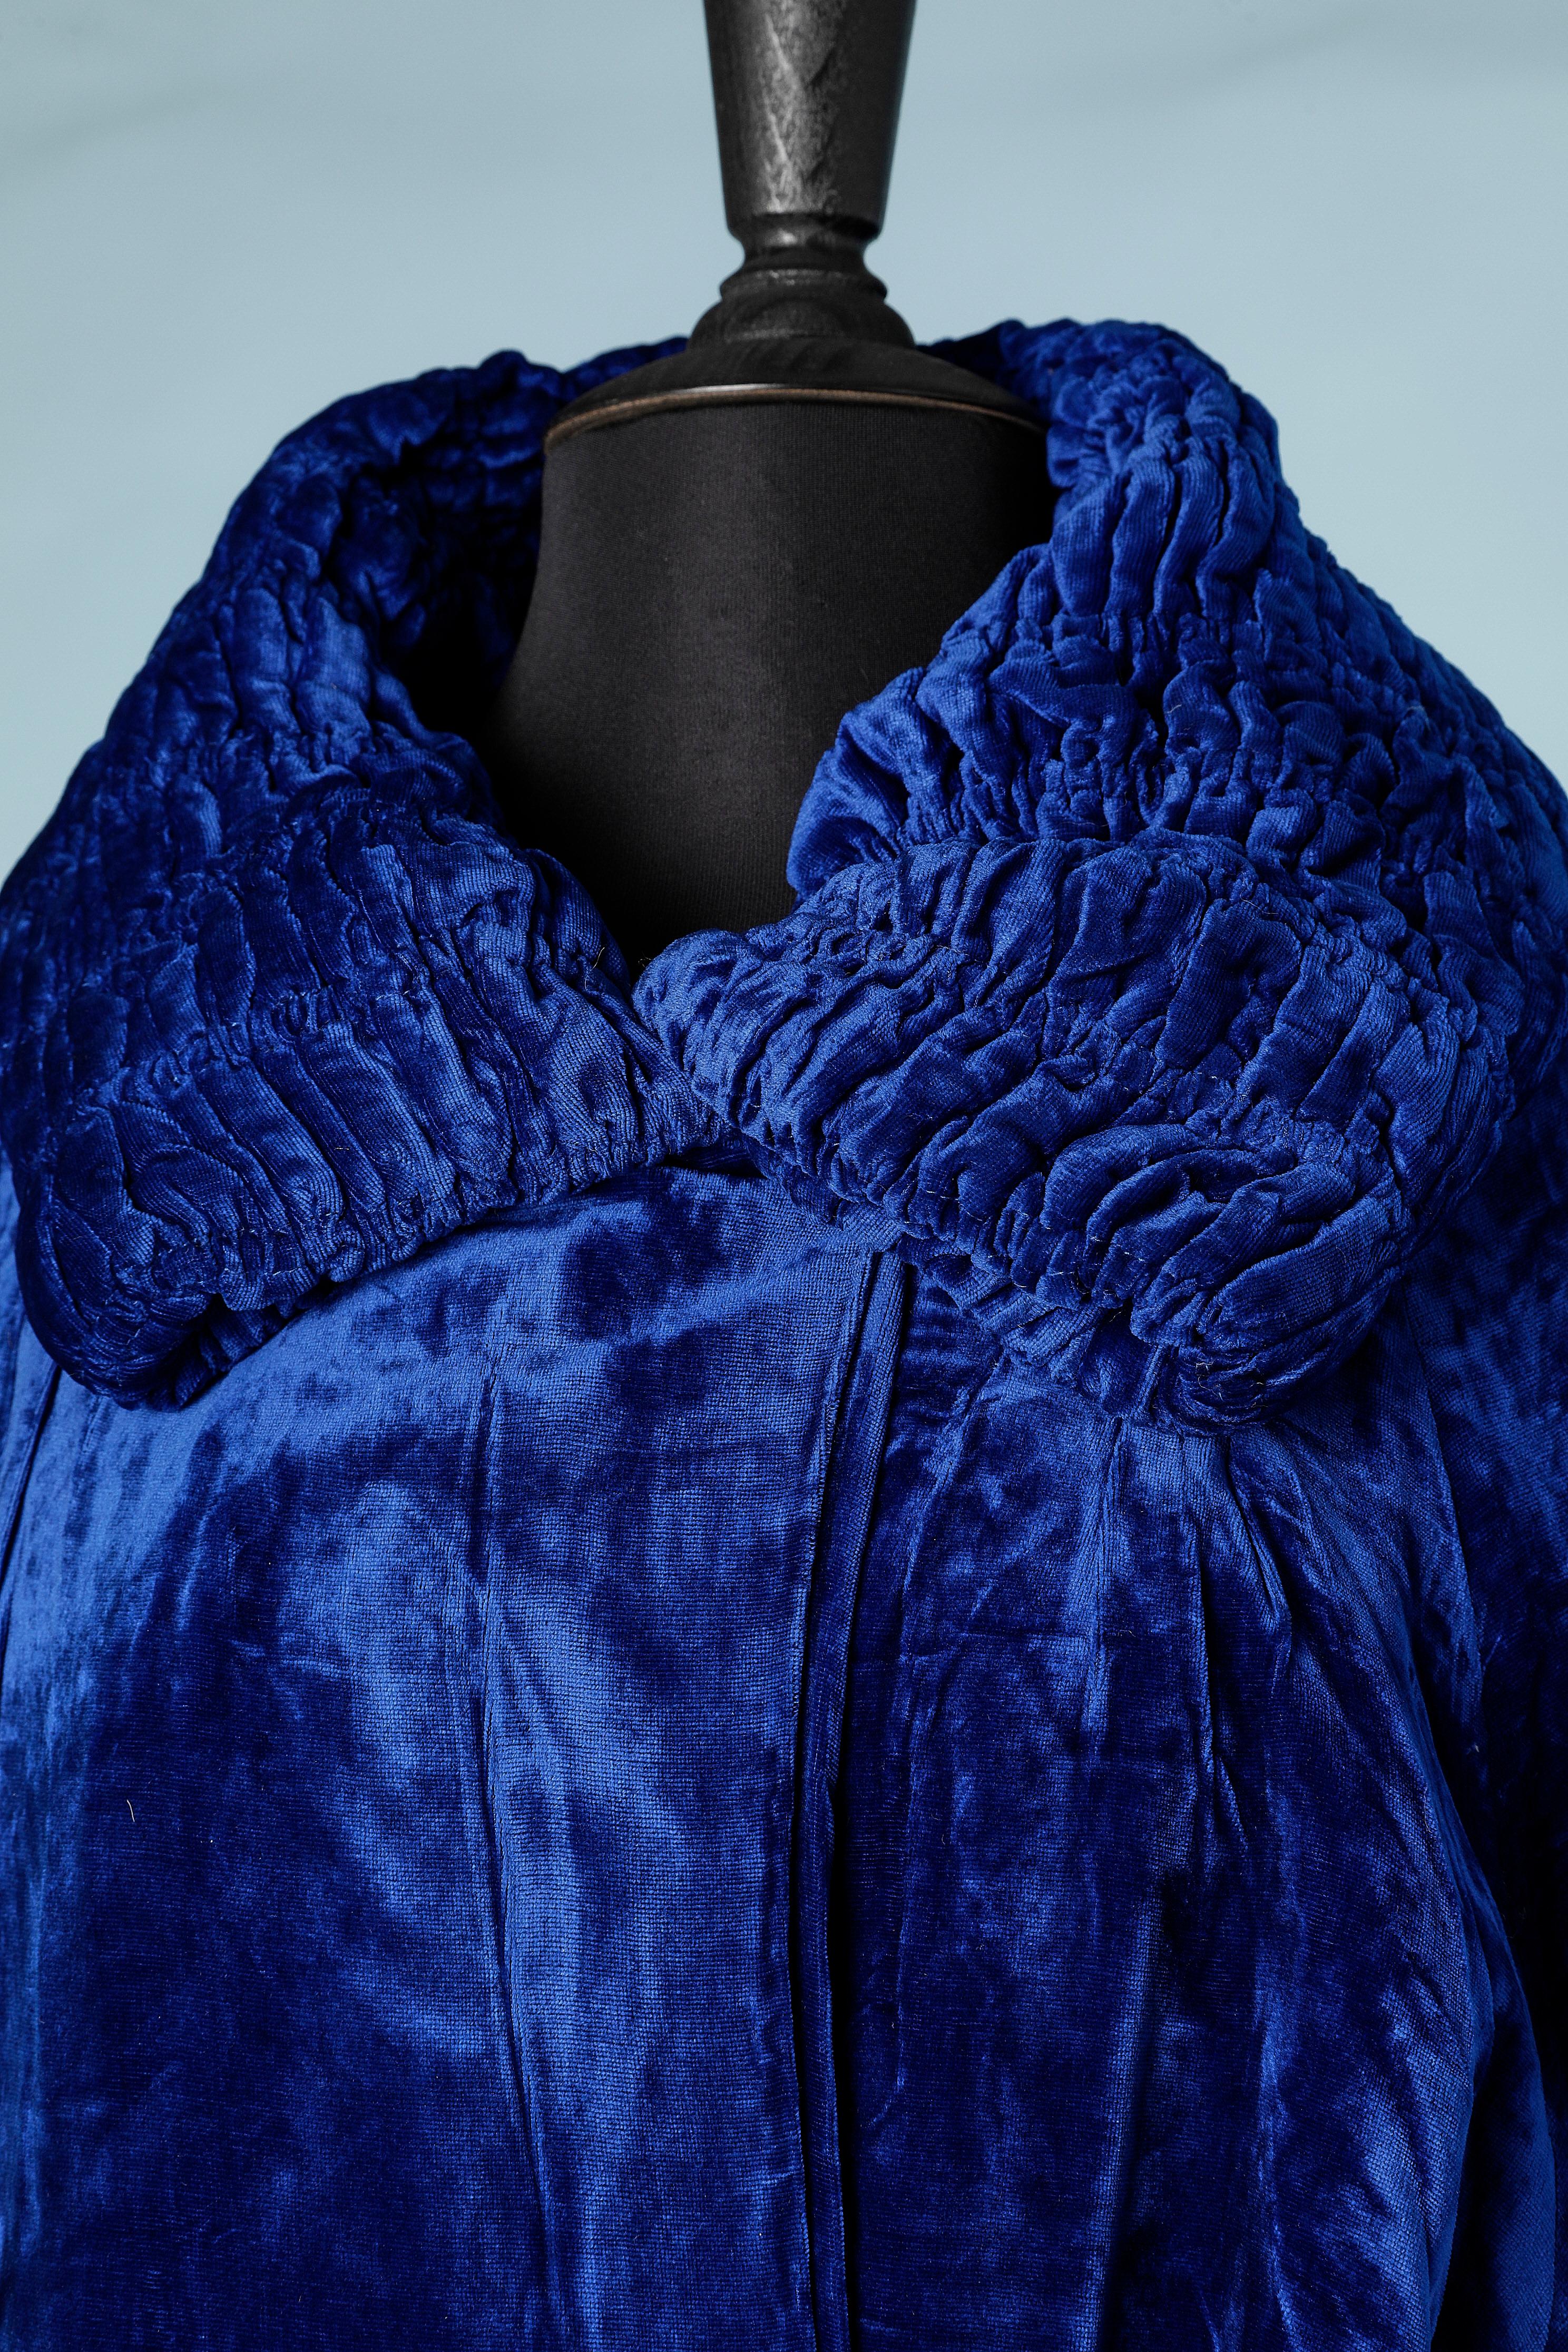 Night blue silk velvet Opera coat. 2 buttons, one on the top, one on the side hips ( in wood) White satin lining
SIZE L 